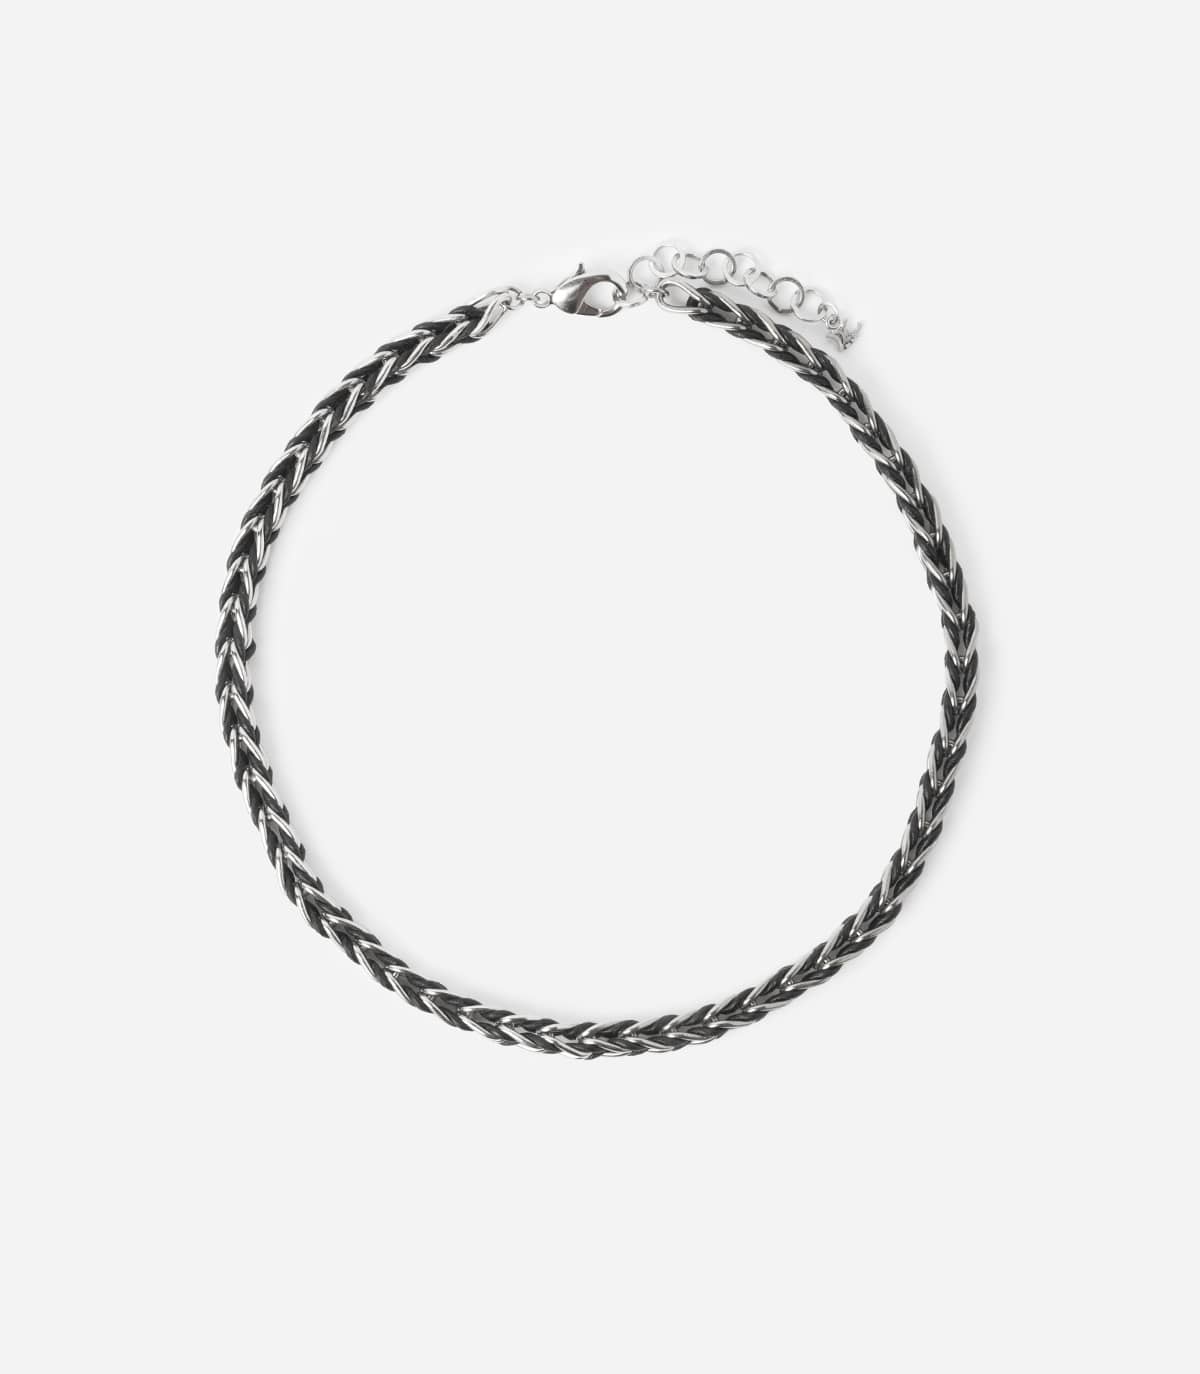 ODIN BRAIDED LEATHER NECKLACE - Collier - Delphine-Charlotte Parmentier